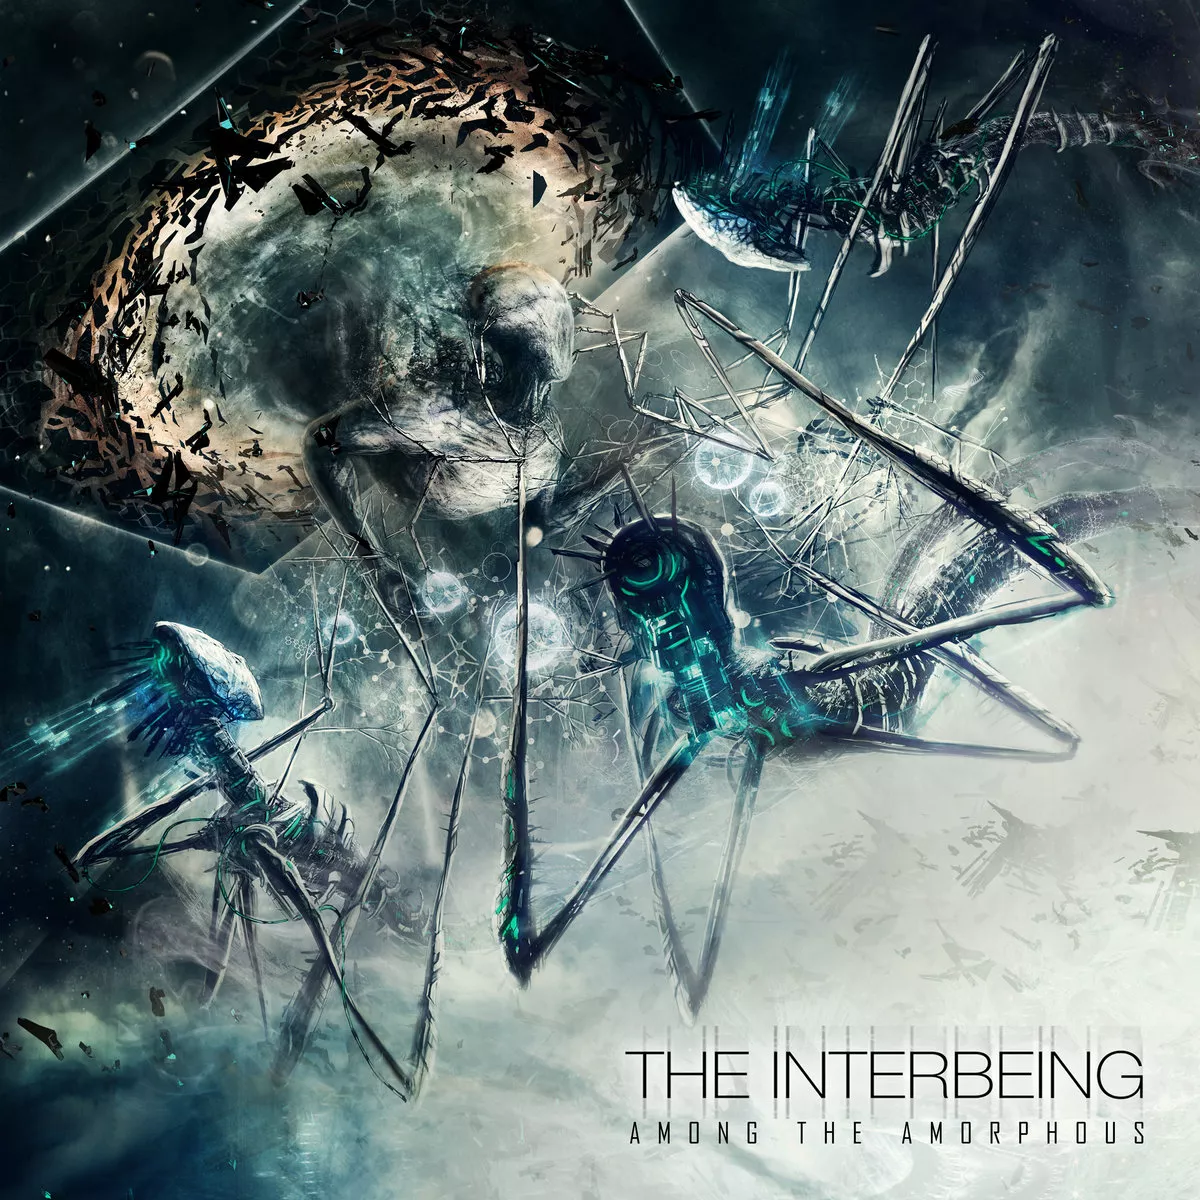 Among The Amorphous - The Interbeing